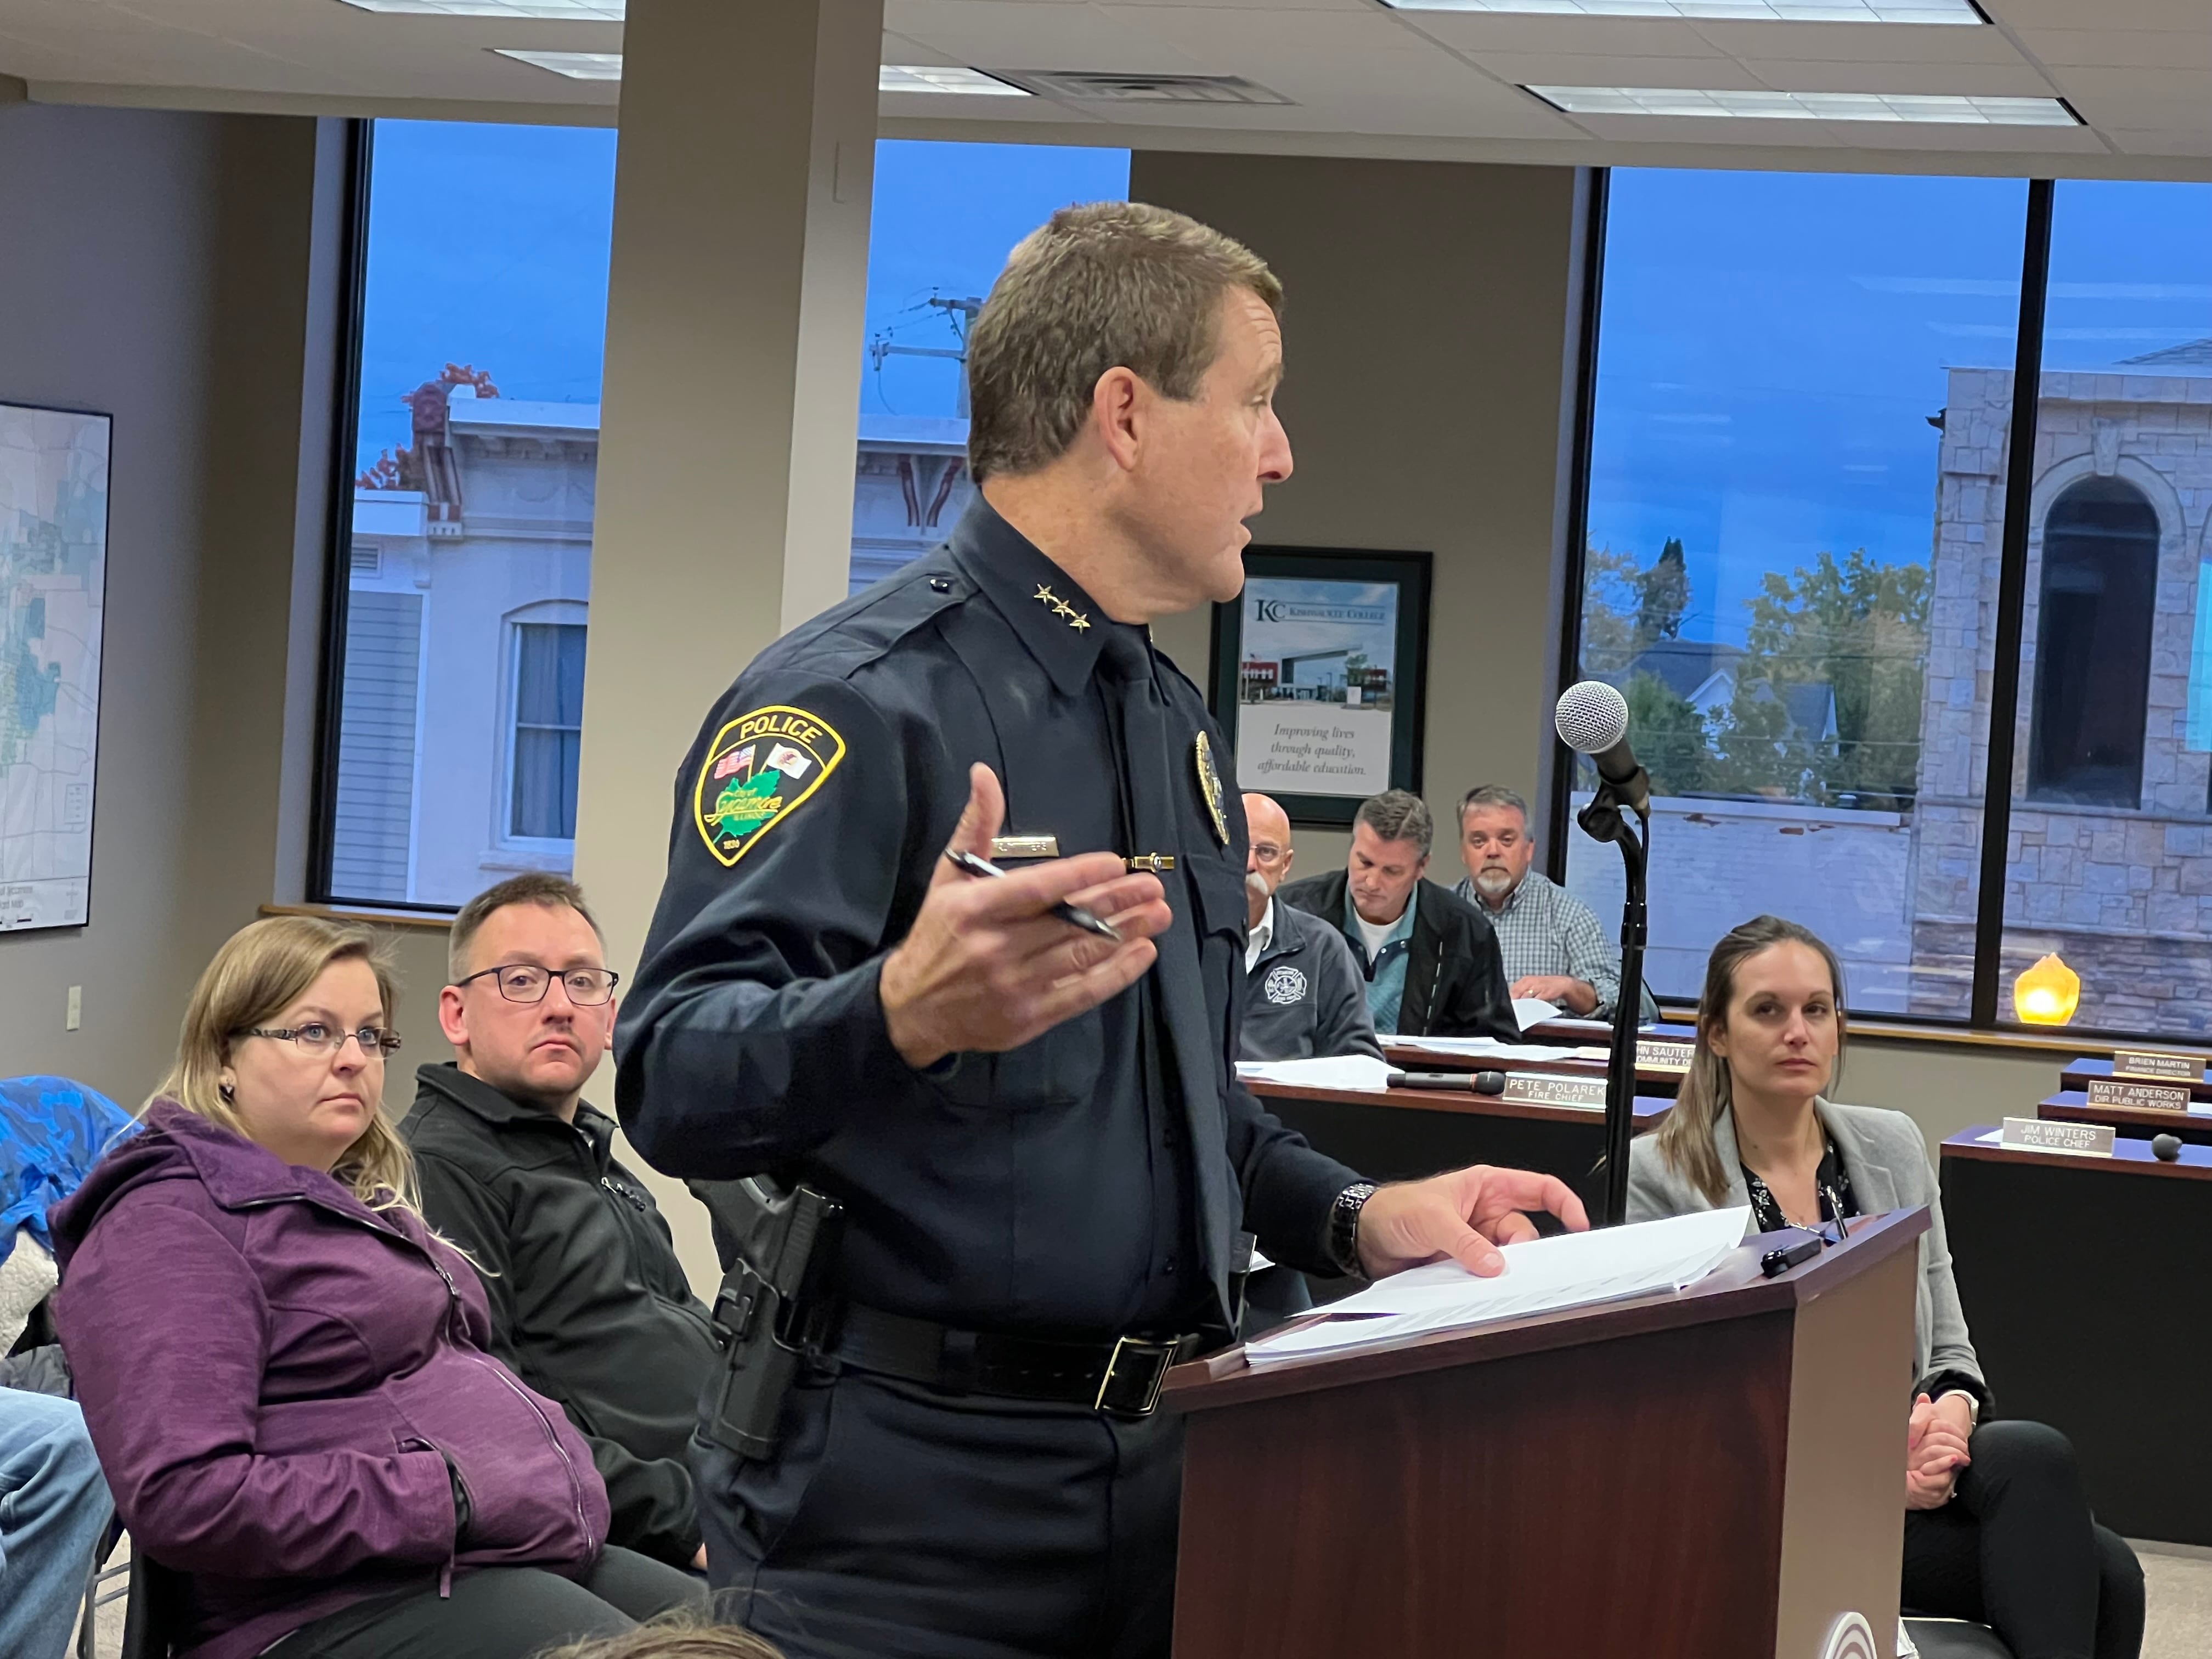 More cops to address slowed response times, increased calls, asks Sycamore police chief in 5-year plan